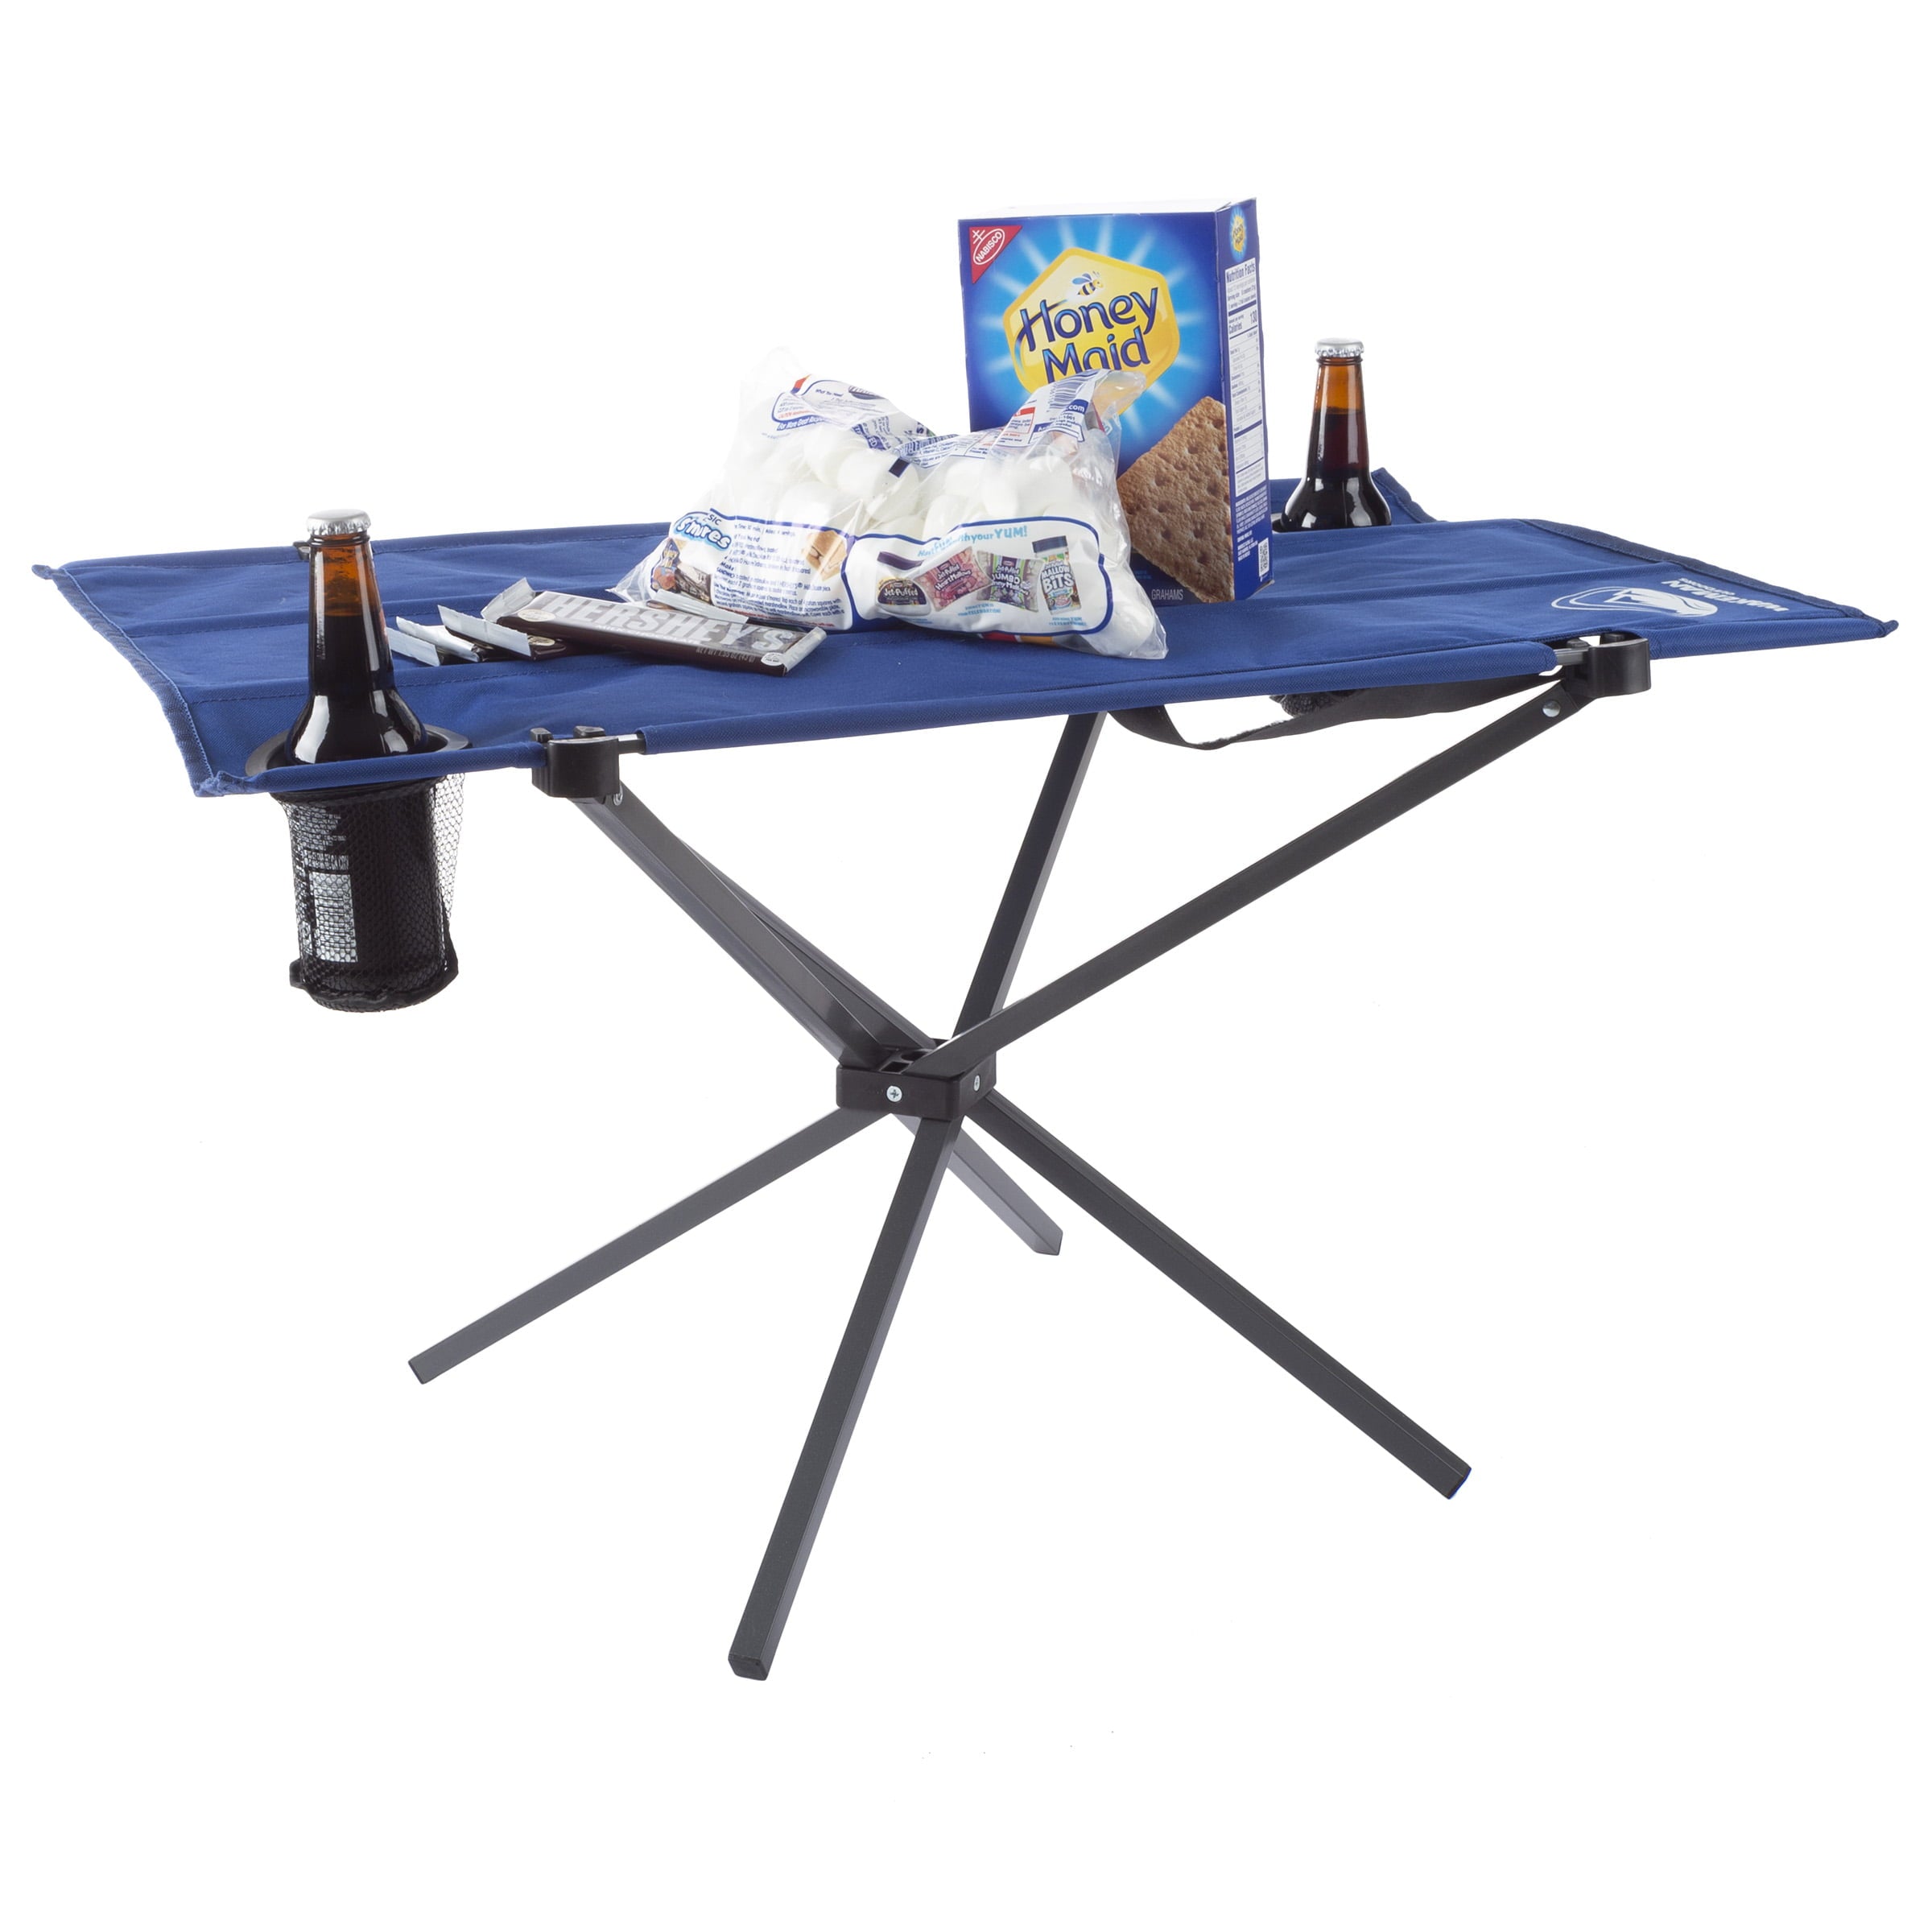 Camp Table-Outdoor Folding Table with 2 Cupholders and Carrying Bag-For Camping， Hiking， Beach， Picnic， or Sporting Events by Wakeman Outdoors (Blue)